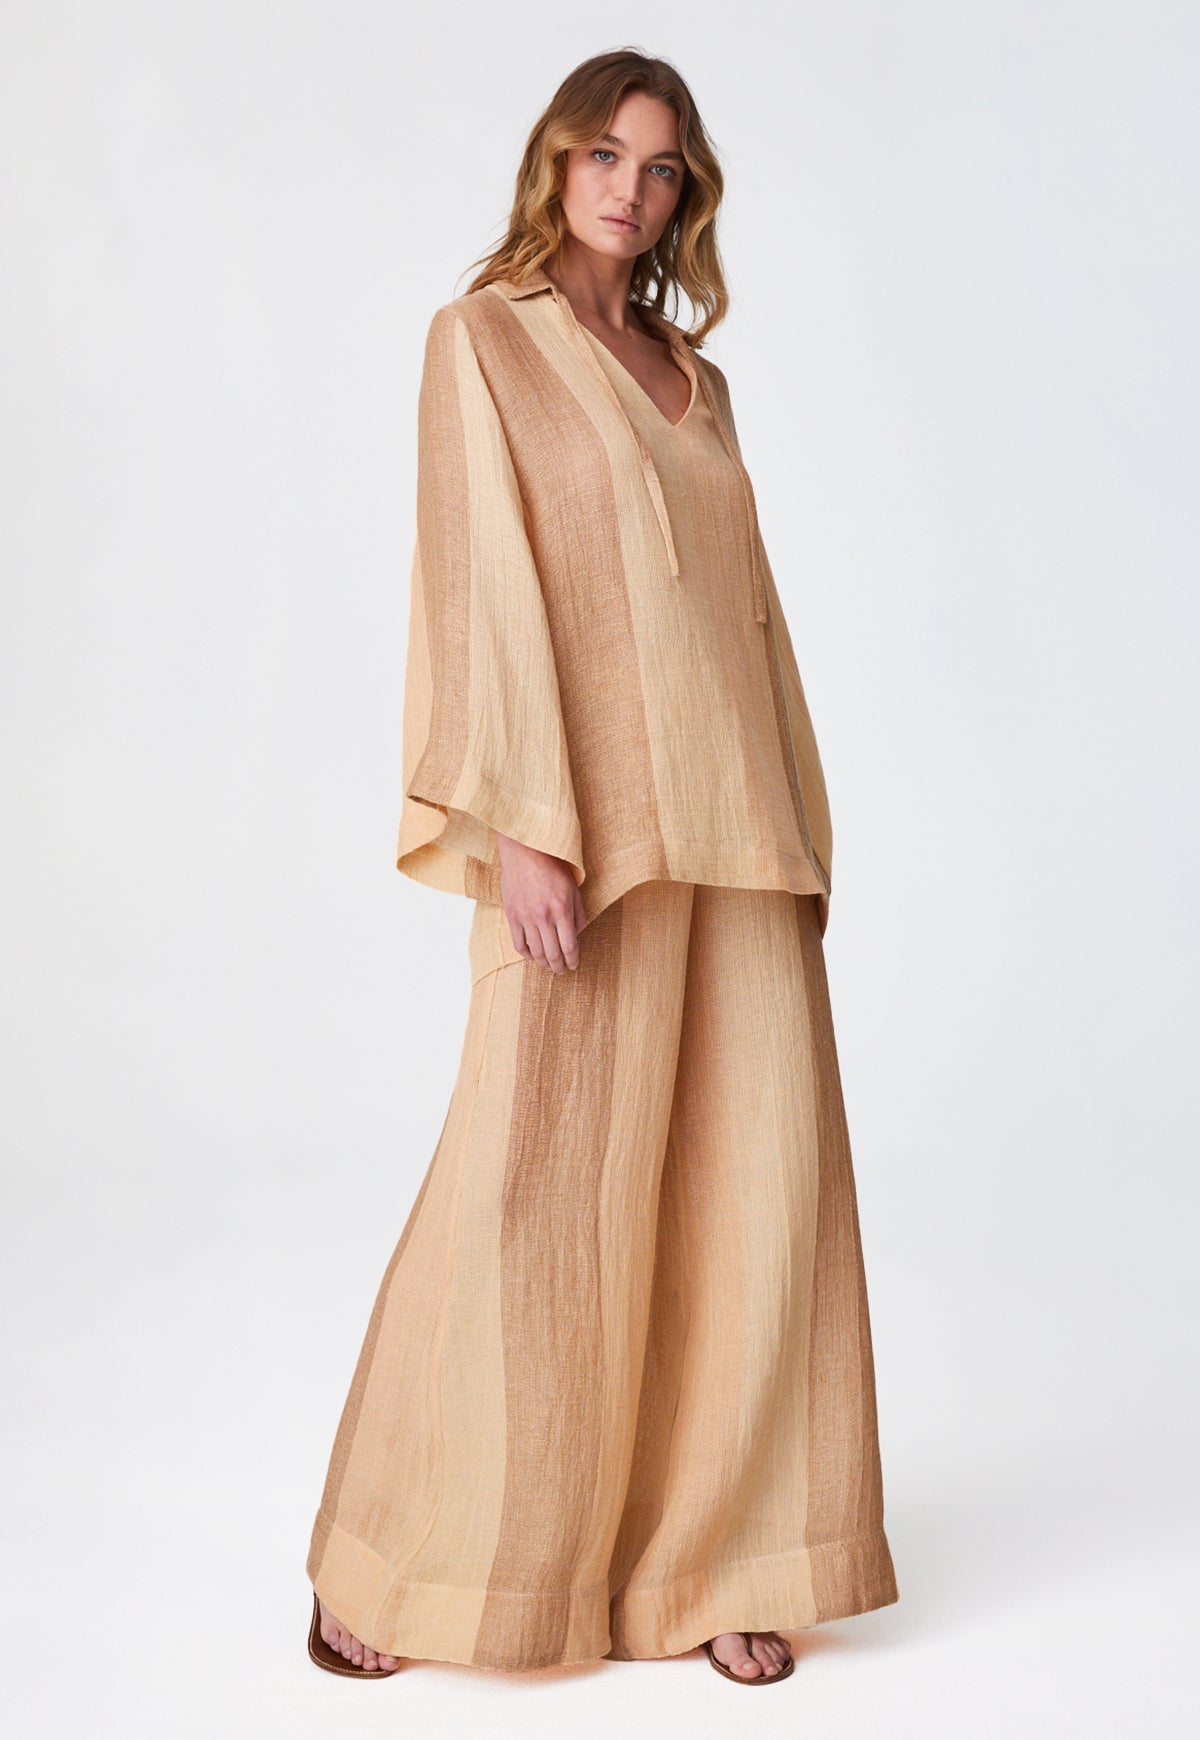 THE LOW-WAIST WIDE LEG PANT in DESERT AWNING STRIPED GAUZE